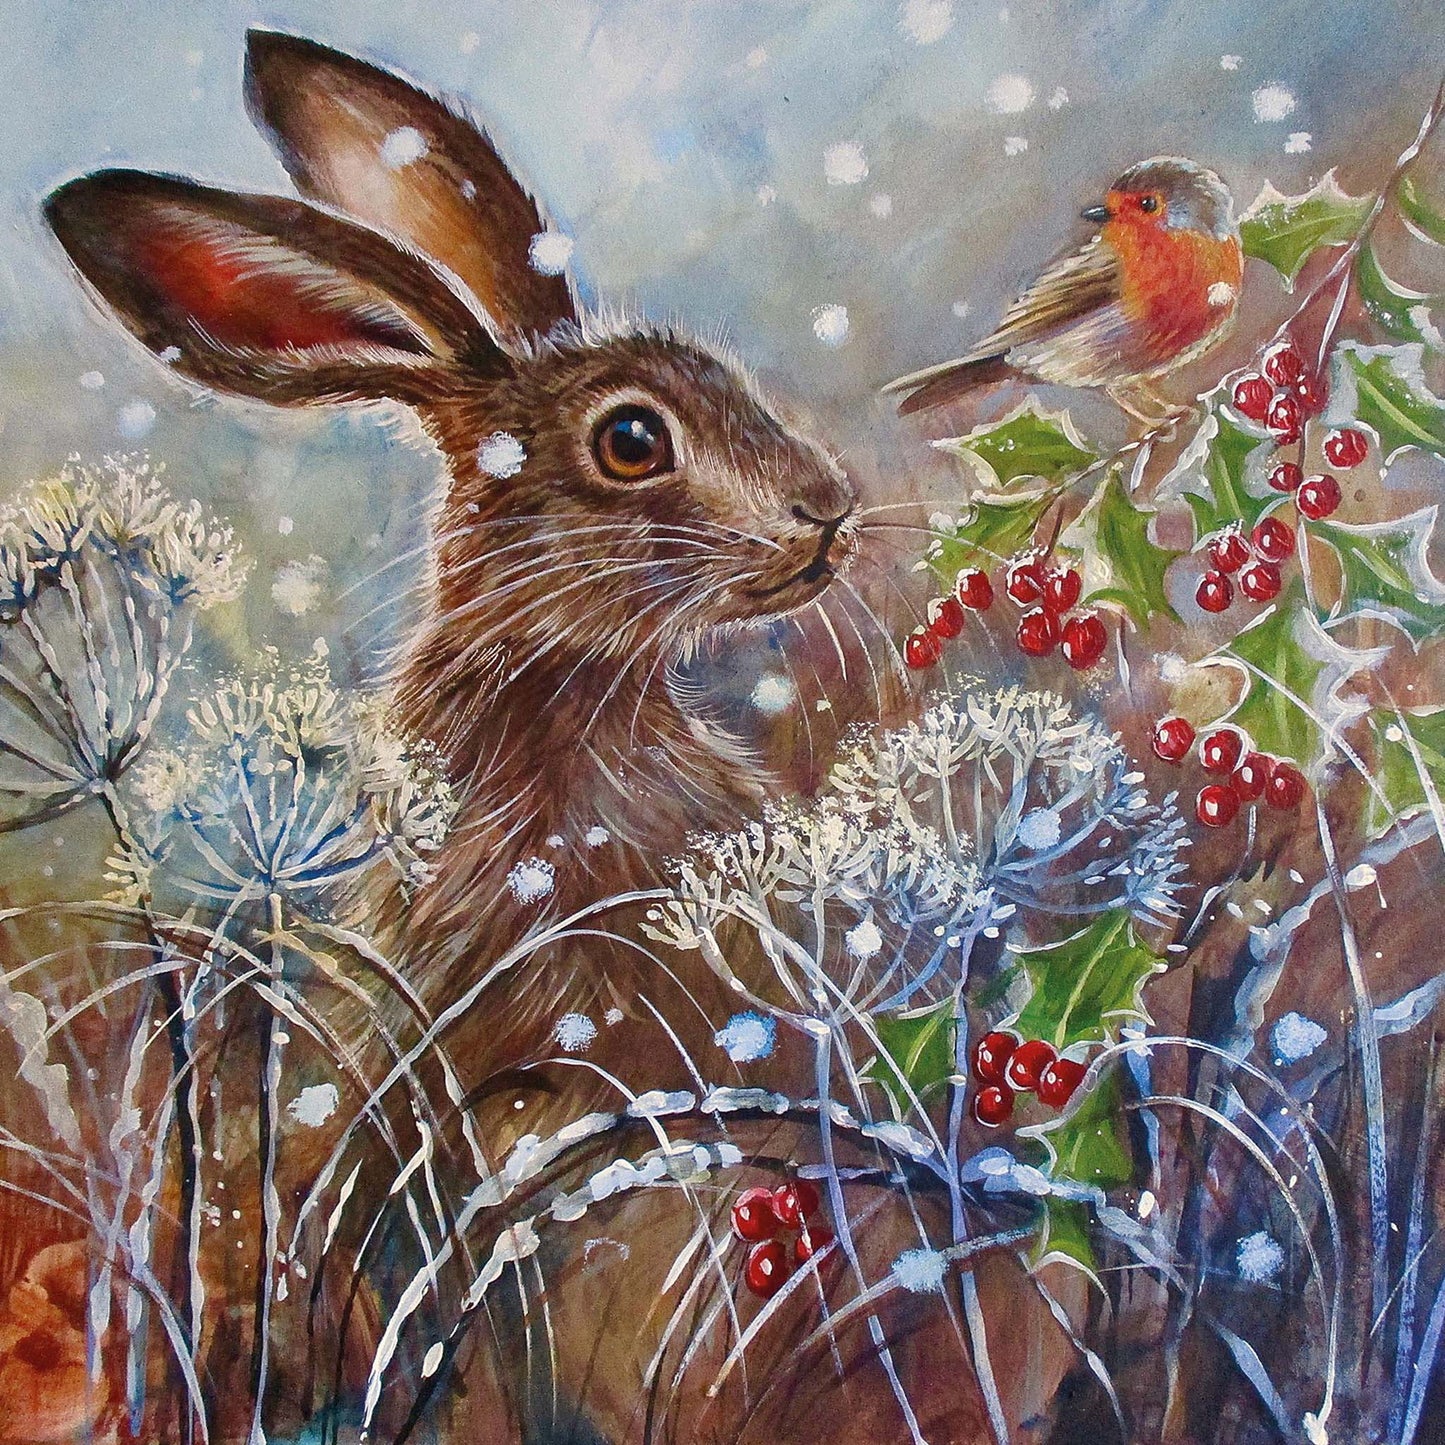 Winter Hare and Robin Christmas cards